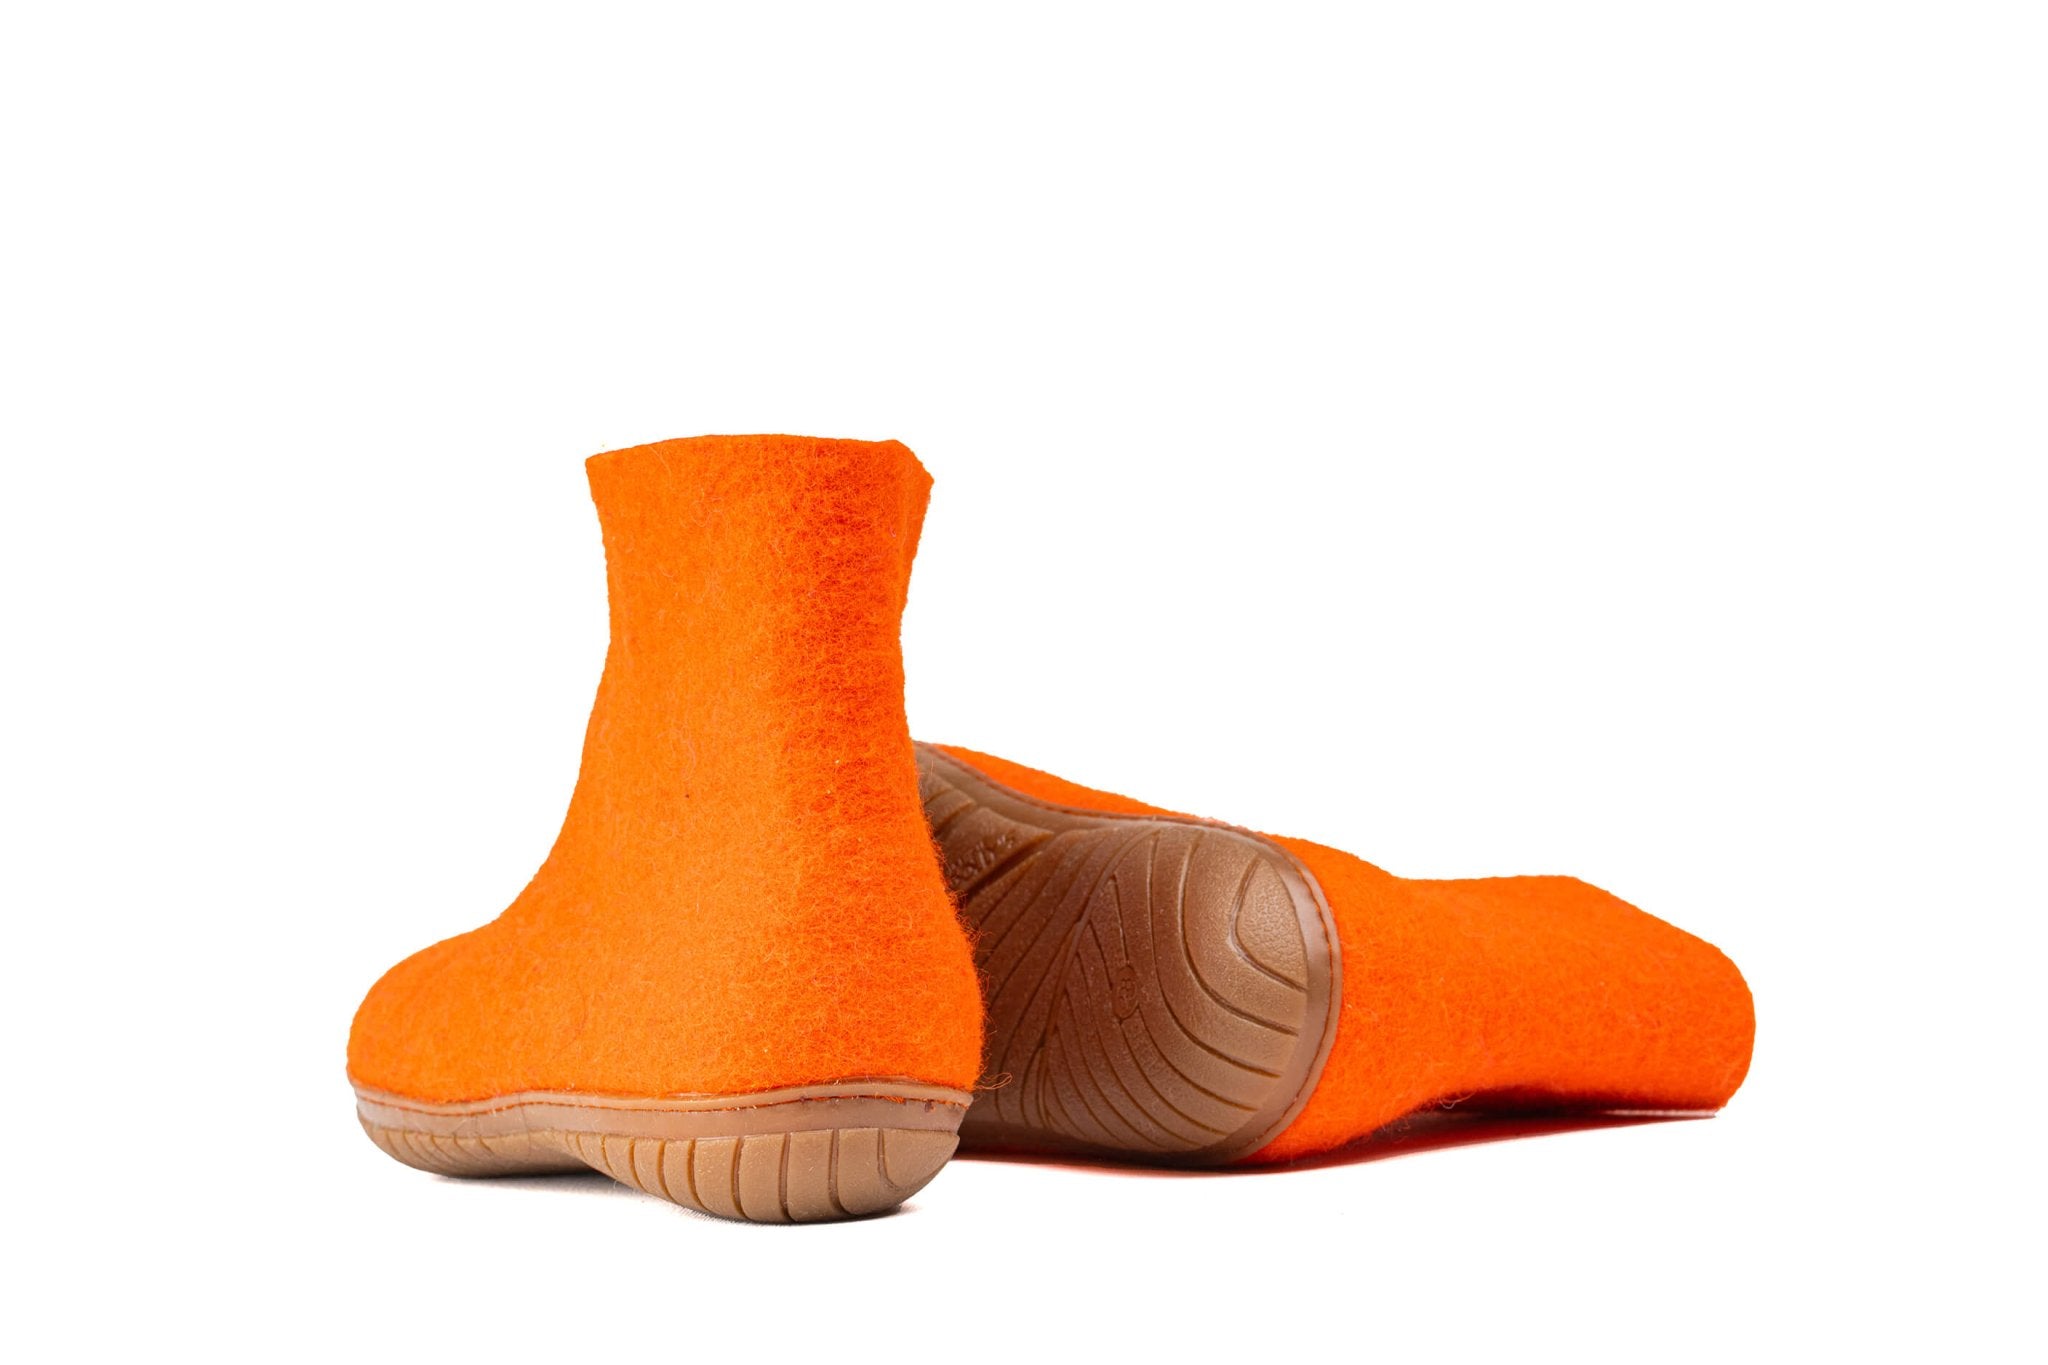 Outdoor Low Boots With Rubber Sole - Orange - Woollyes